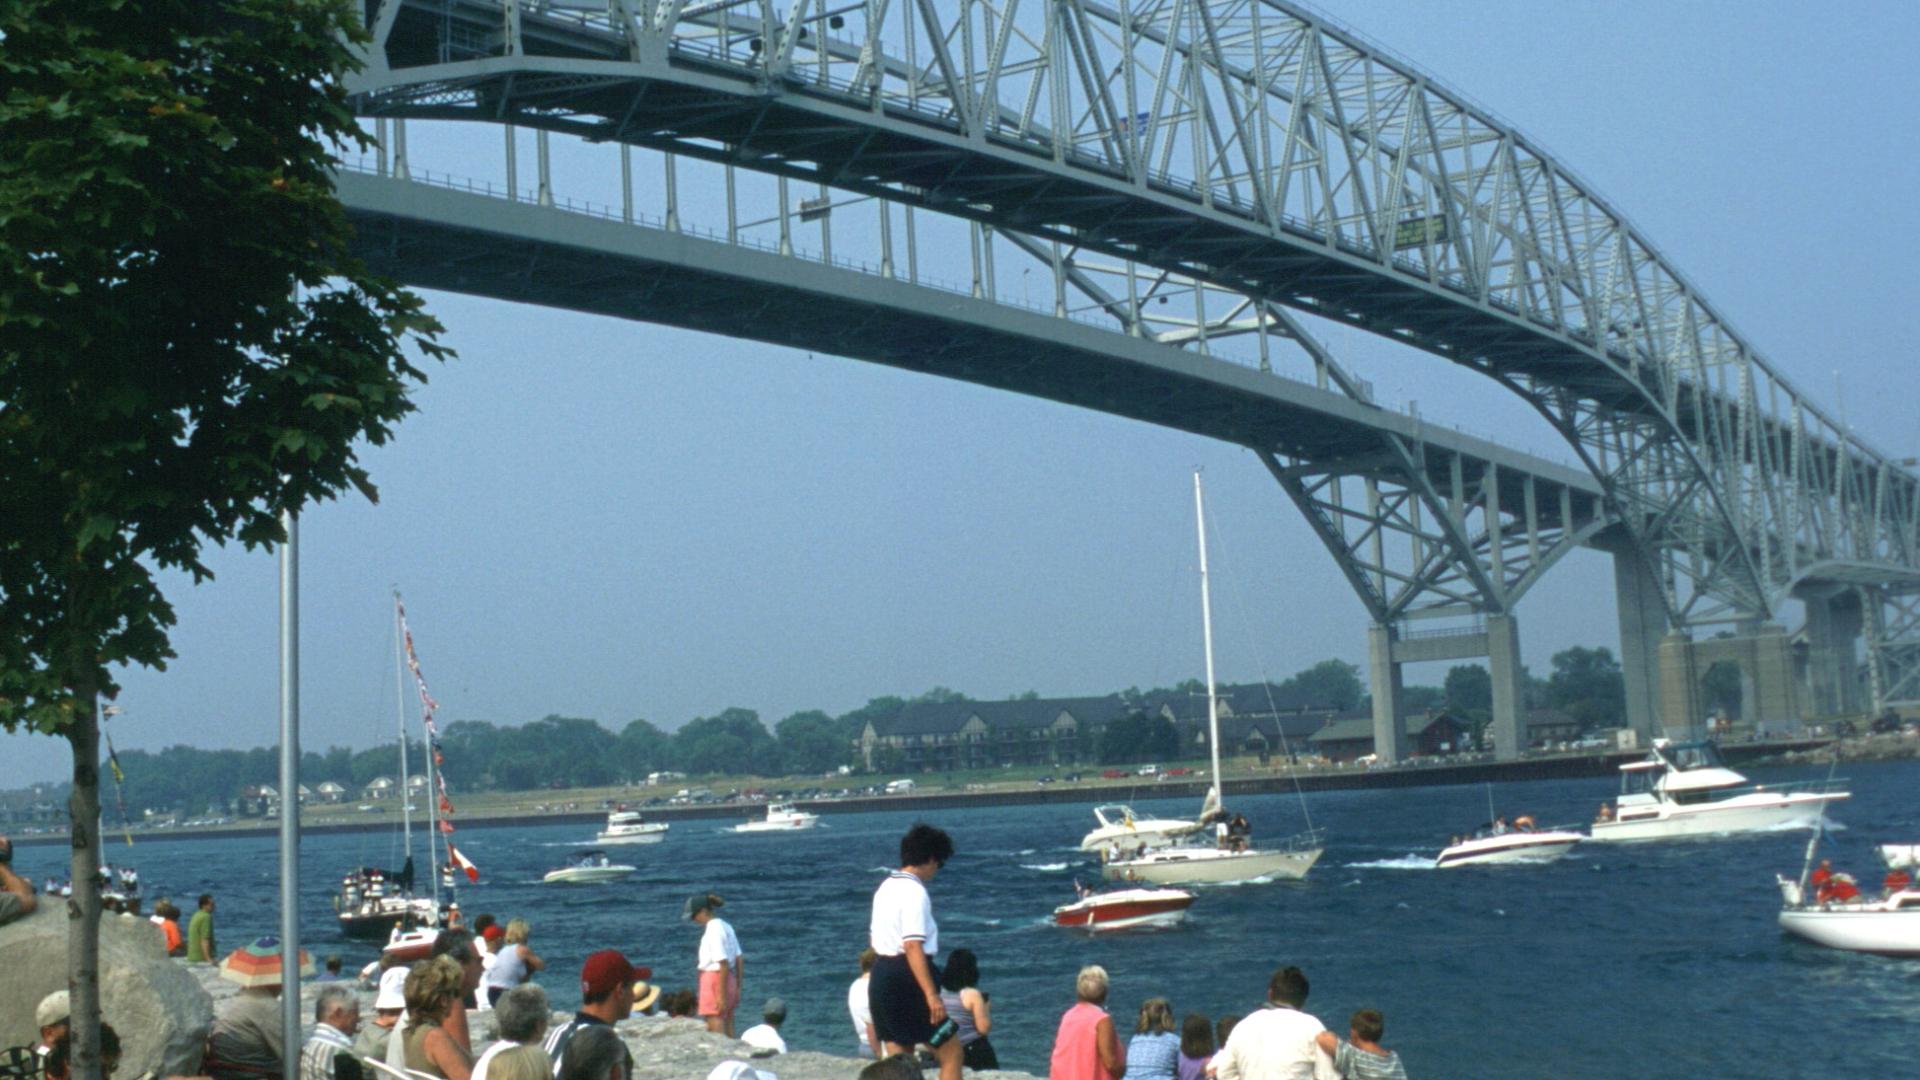 People sitting at the bay watching as boats sail under the bridge.